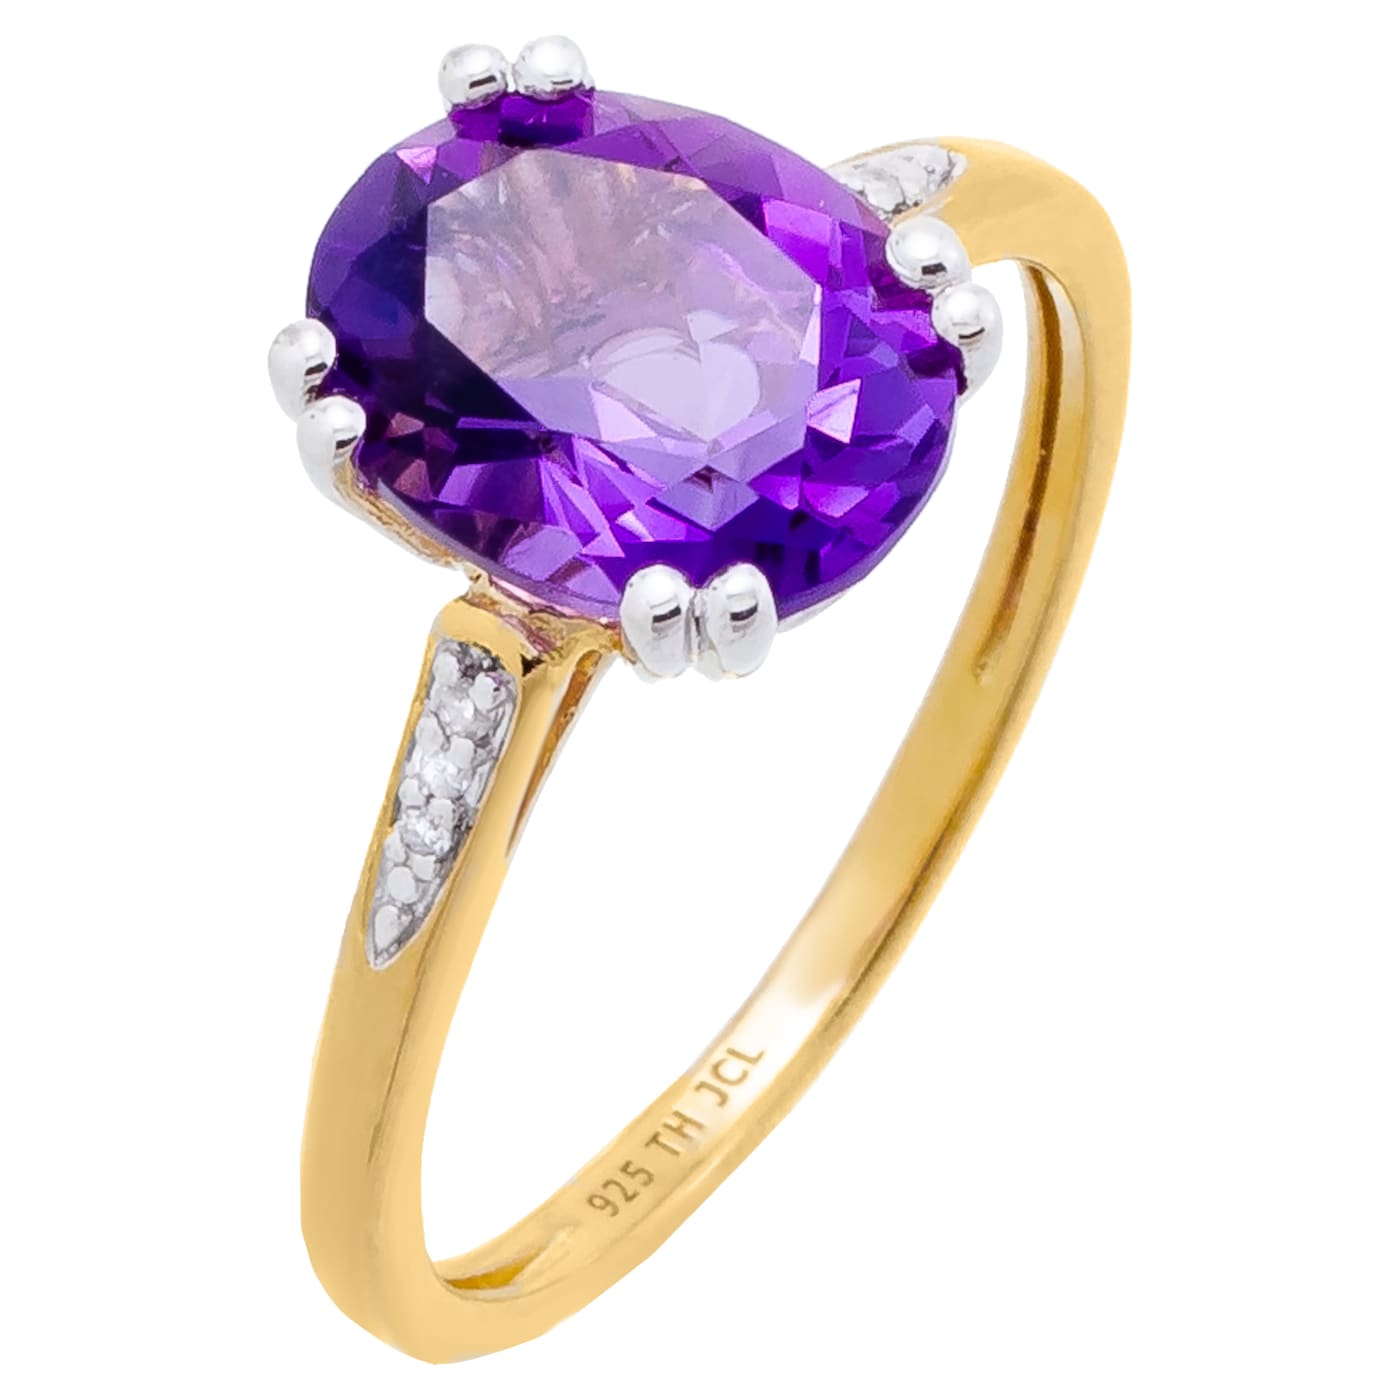 2.58 cttw Amethyst Gemstone Two Tone Ring, 14k Gold Plated on